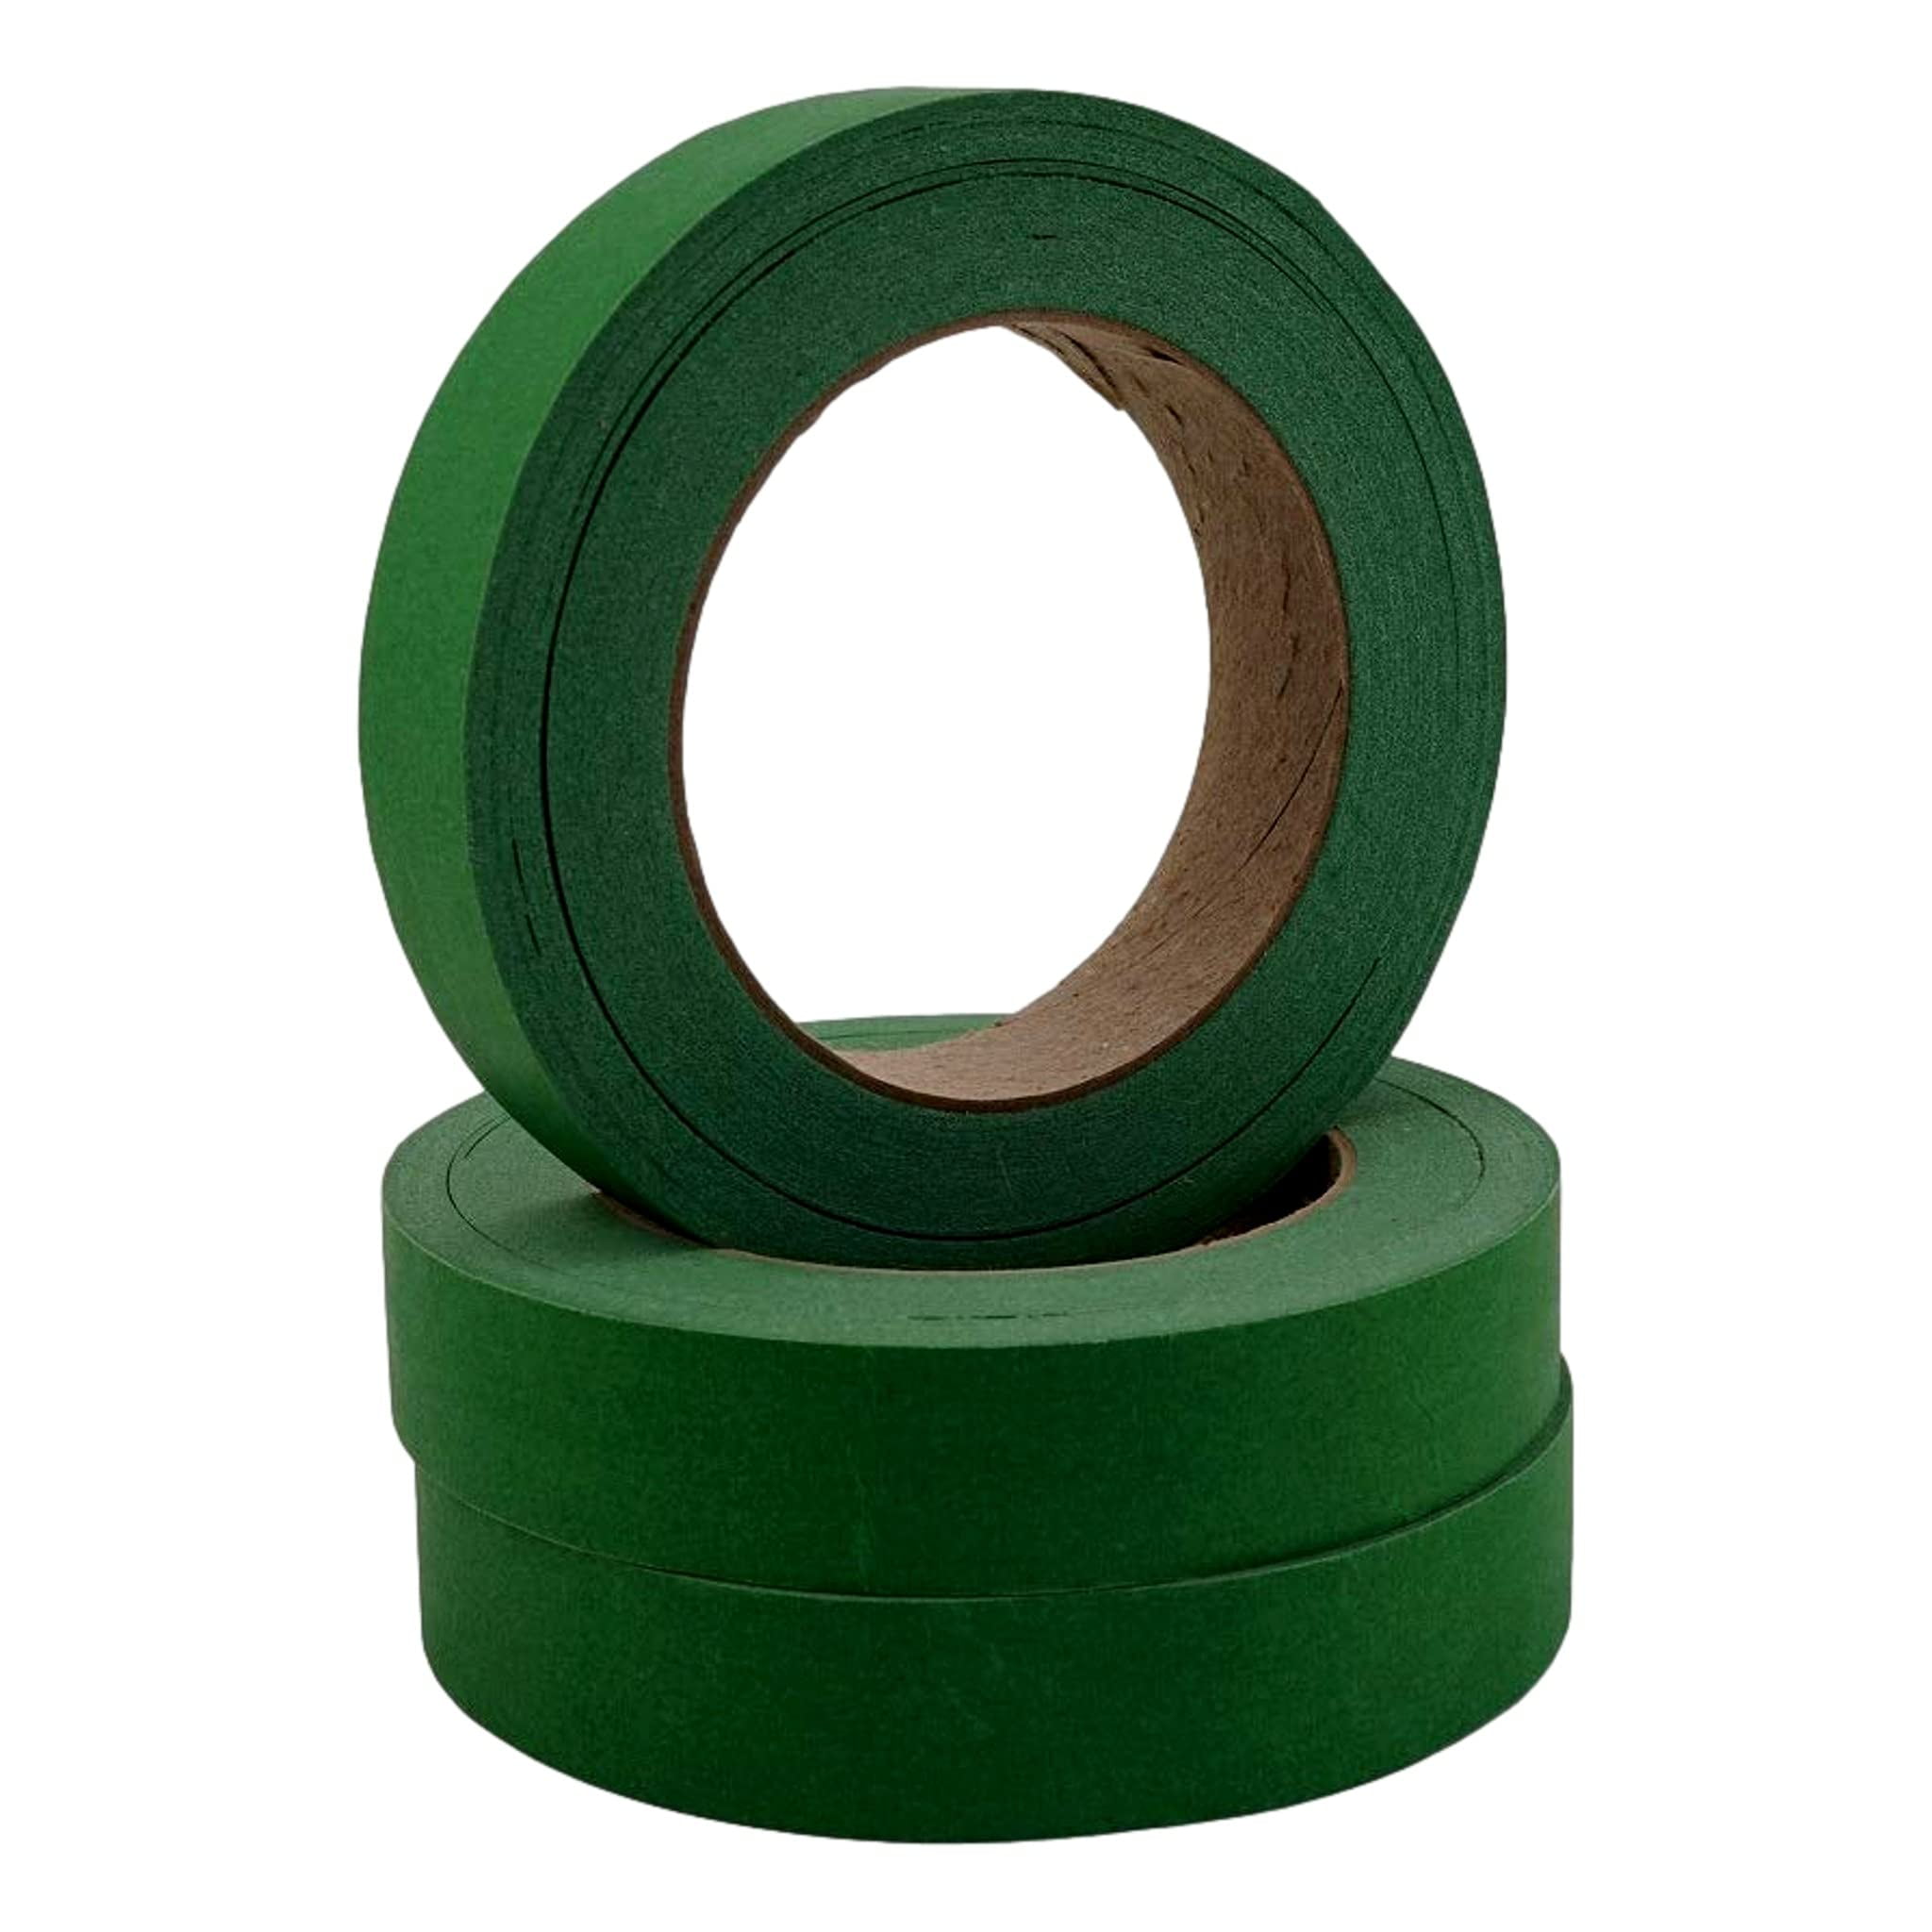 12 Rolls Painters Tape 2" x 60 Yds /Color Frog Green/Made in USA,/Safe Release 